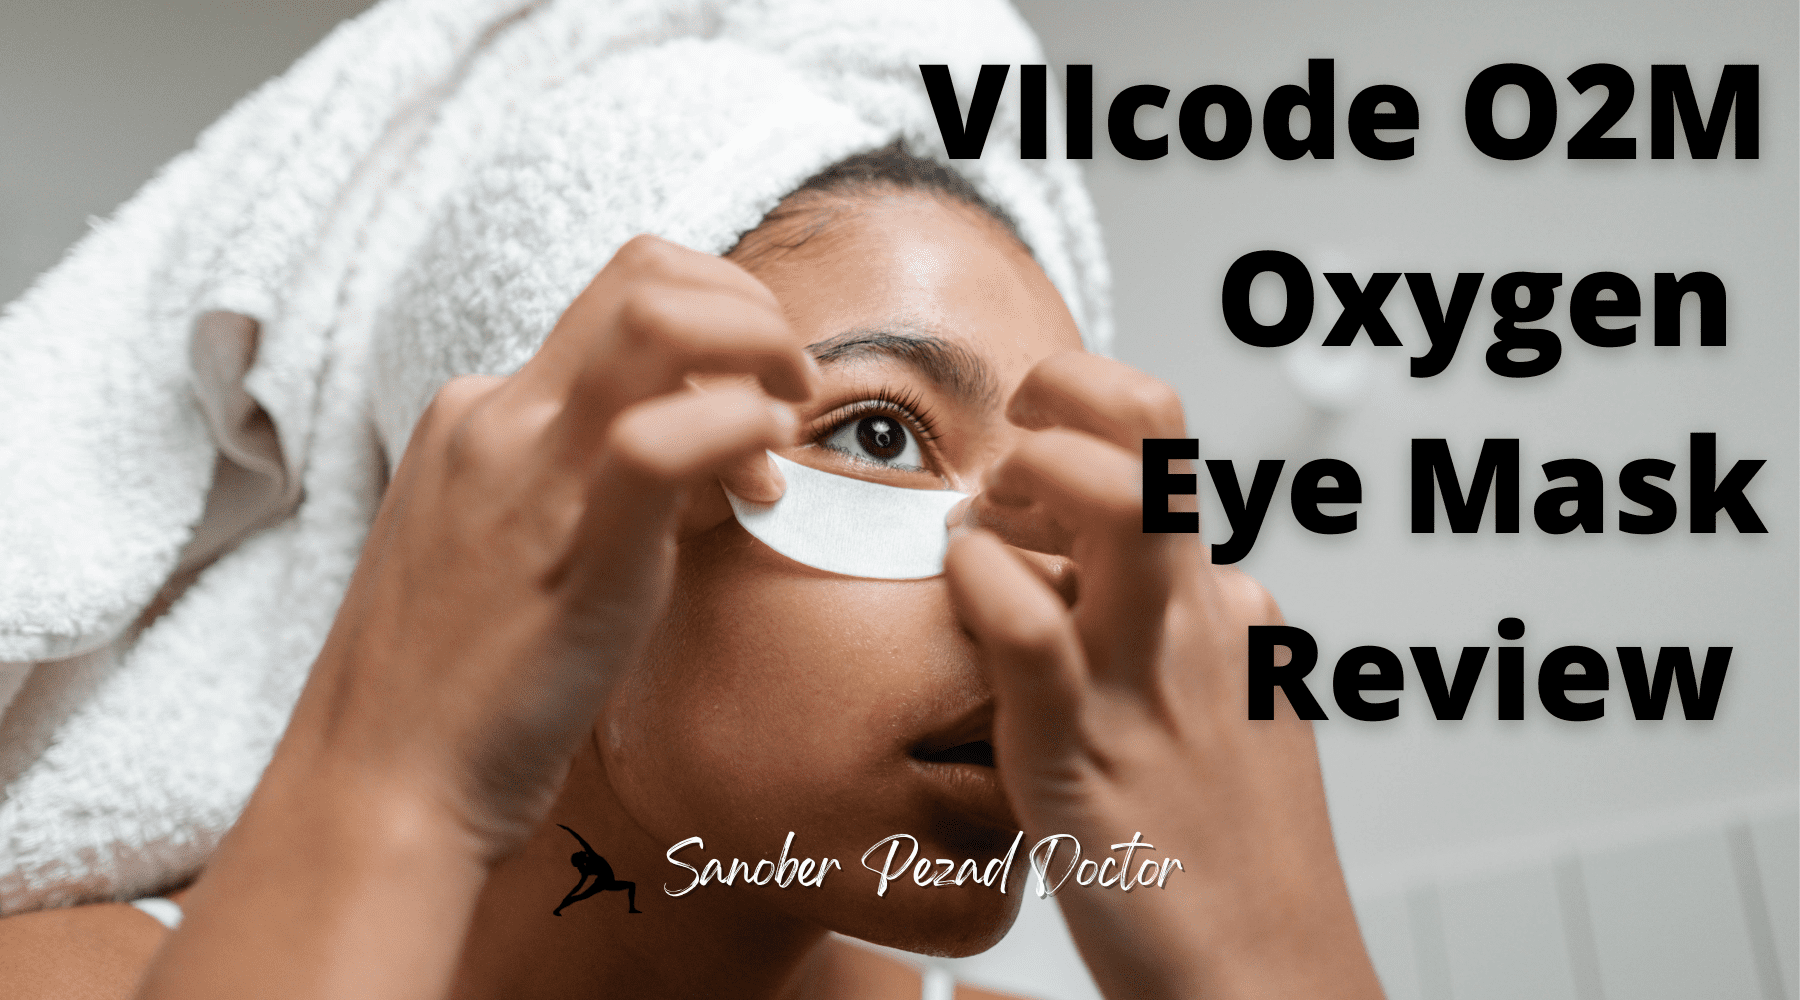 The VIIcode O2 Oxygen Eye Mask Review